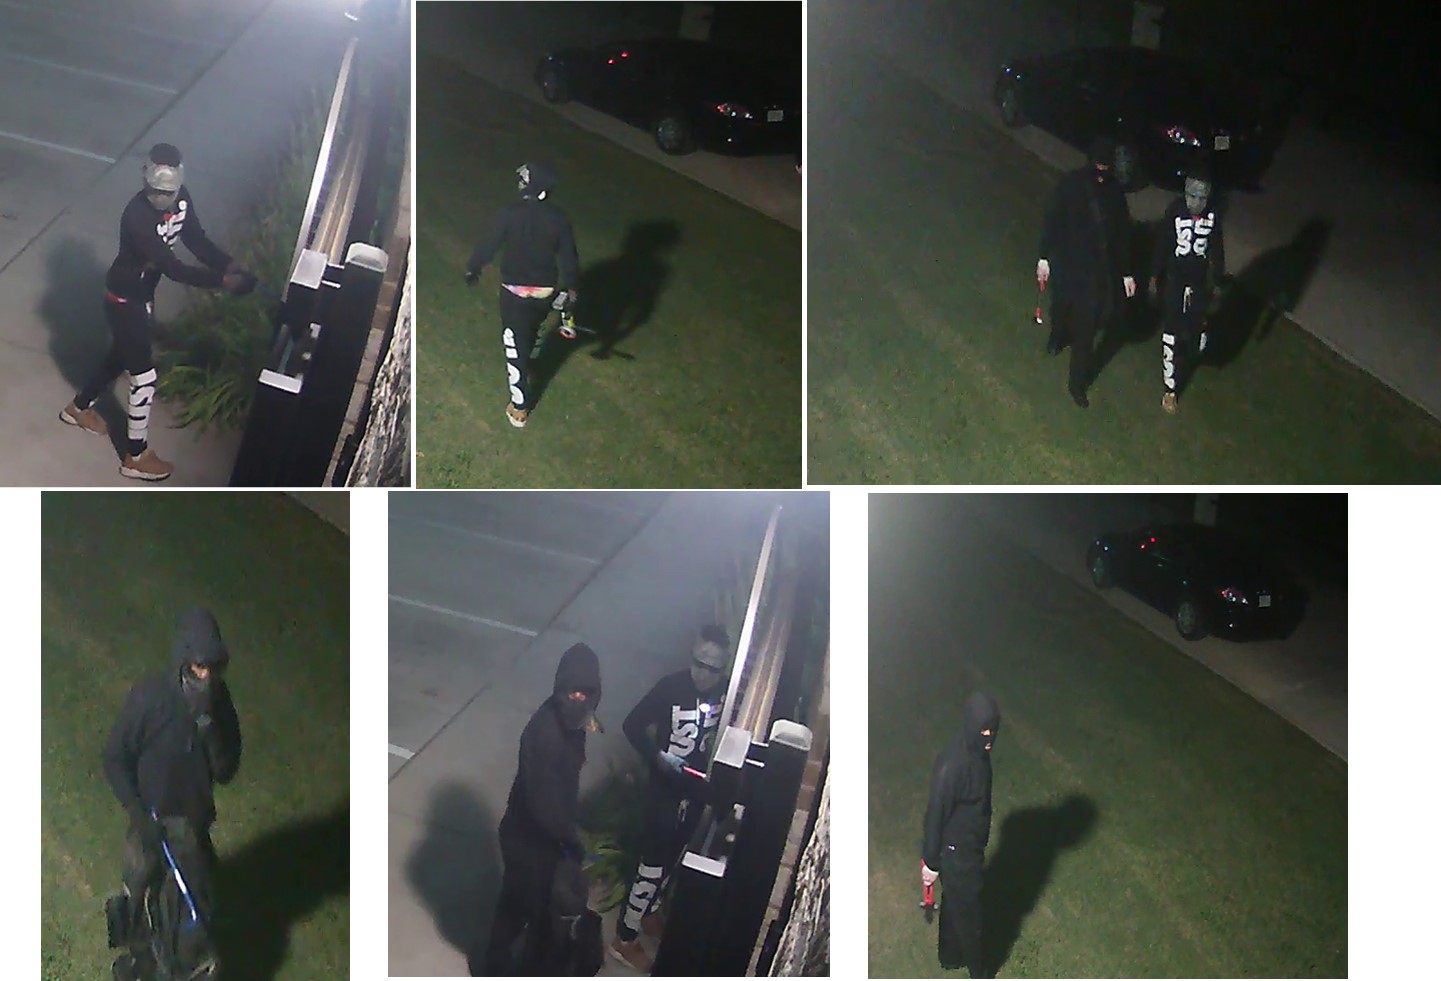 Three masked suspects, dressed in all black, wanted for breaking into Marksmen Firearms